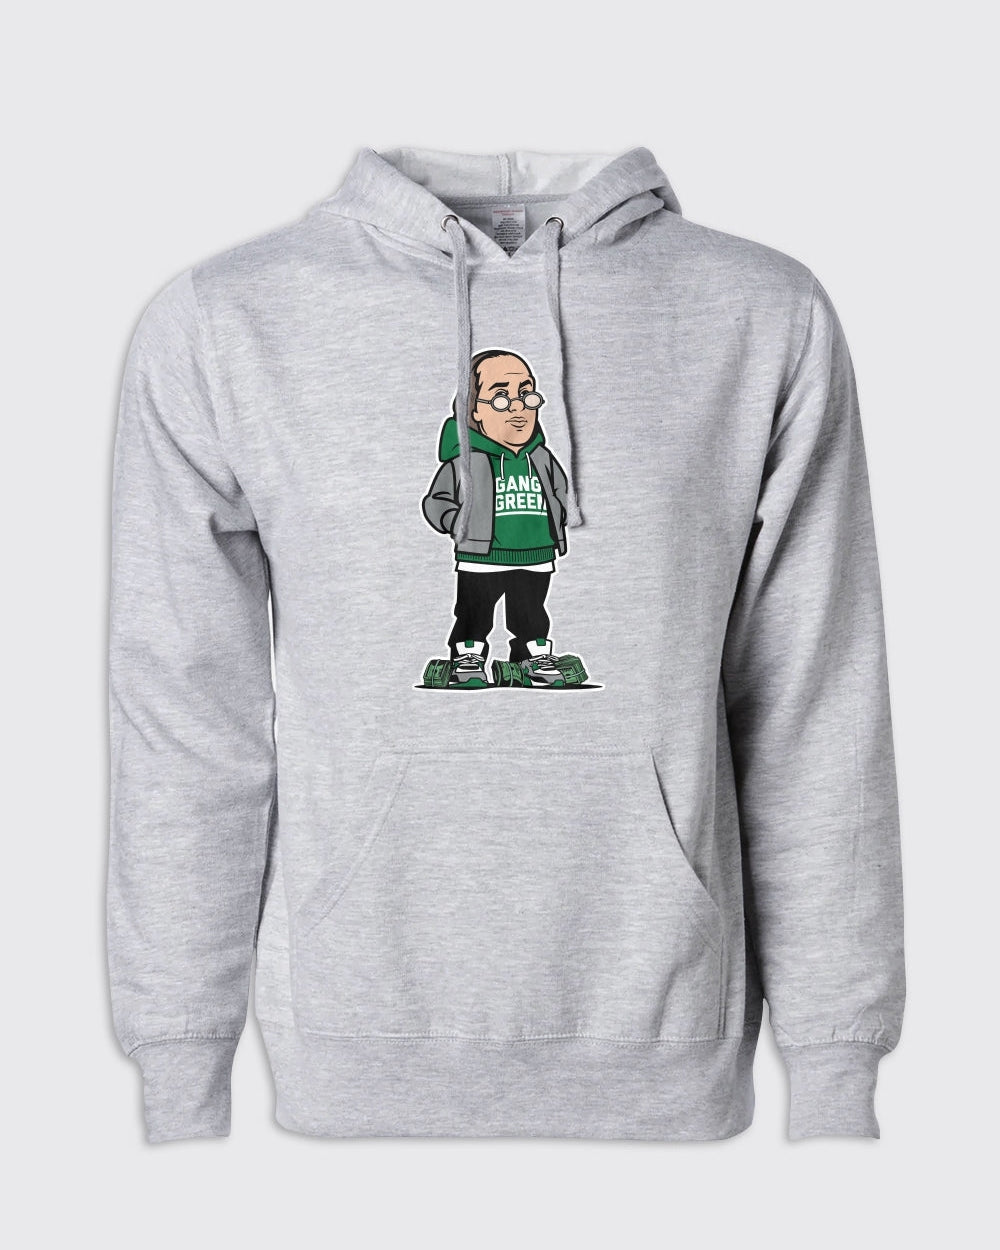 Ben Franklin Eagles Hoodie - Eagles, Hoodies - Philly Sports Shirts